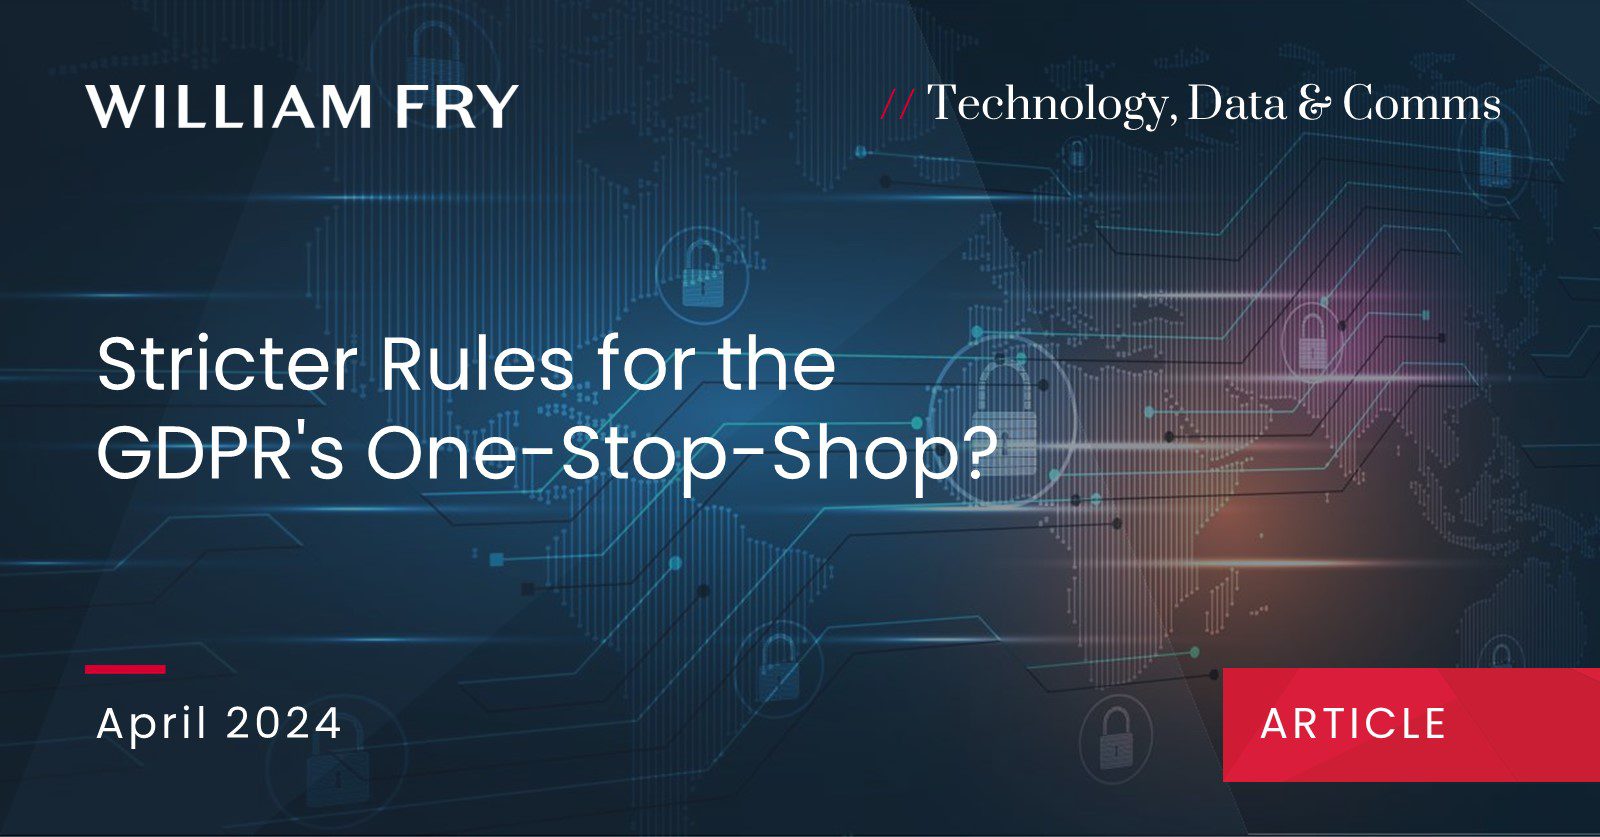 Stricter Rules for the GDPR's One-Stop-Shop?